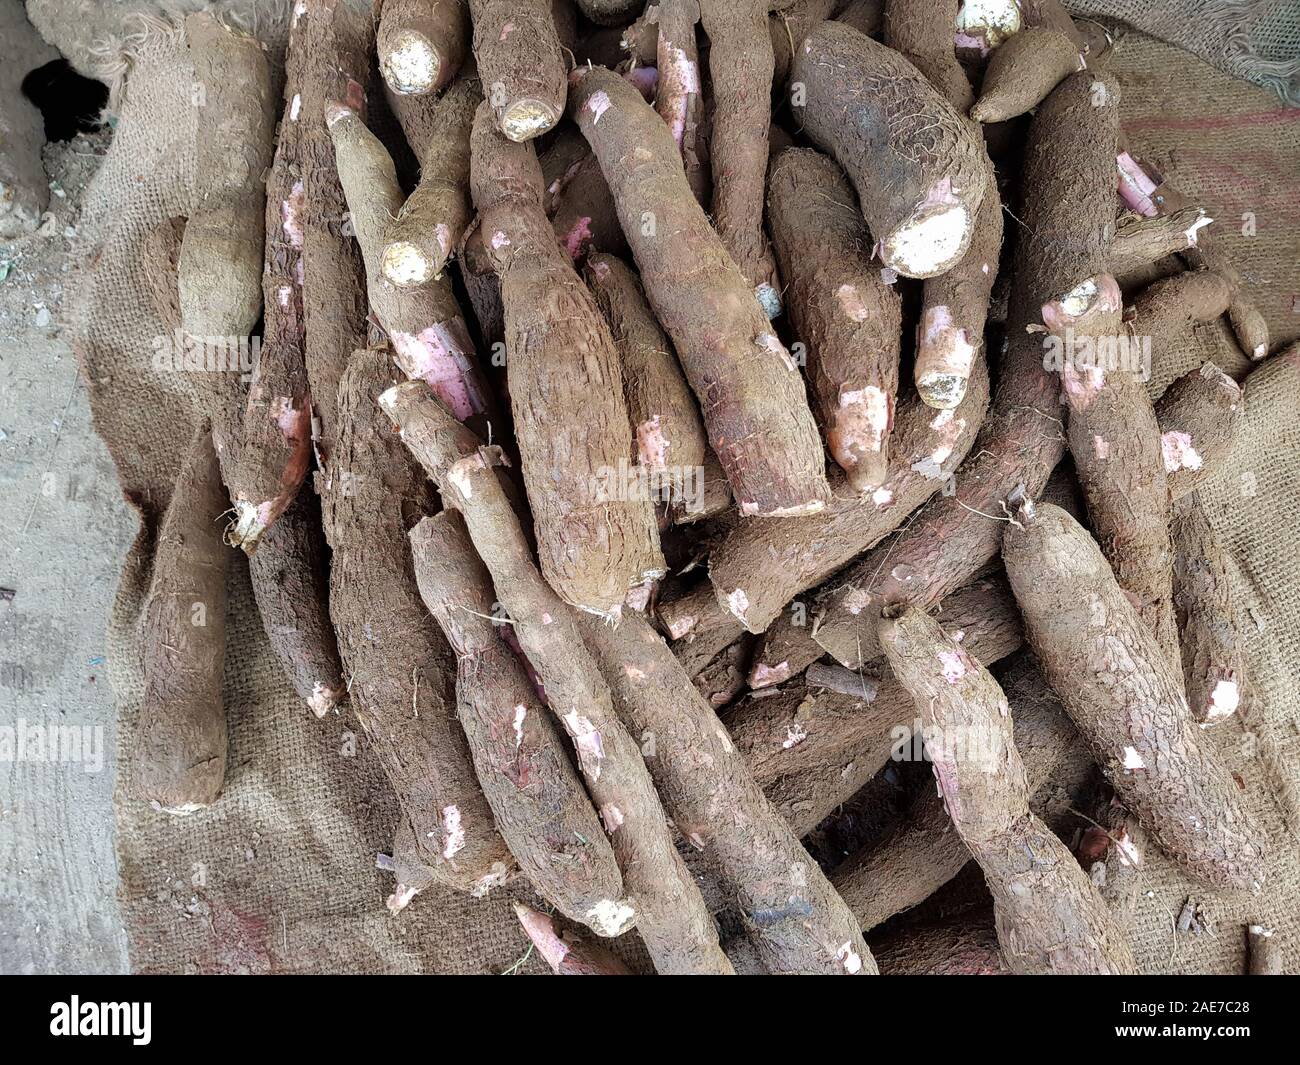 Cassava or manioc is an edible root. Manihot esculenta. Market of fruit and vegetable in Sri Lanka Stock Photo